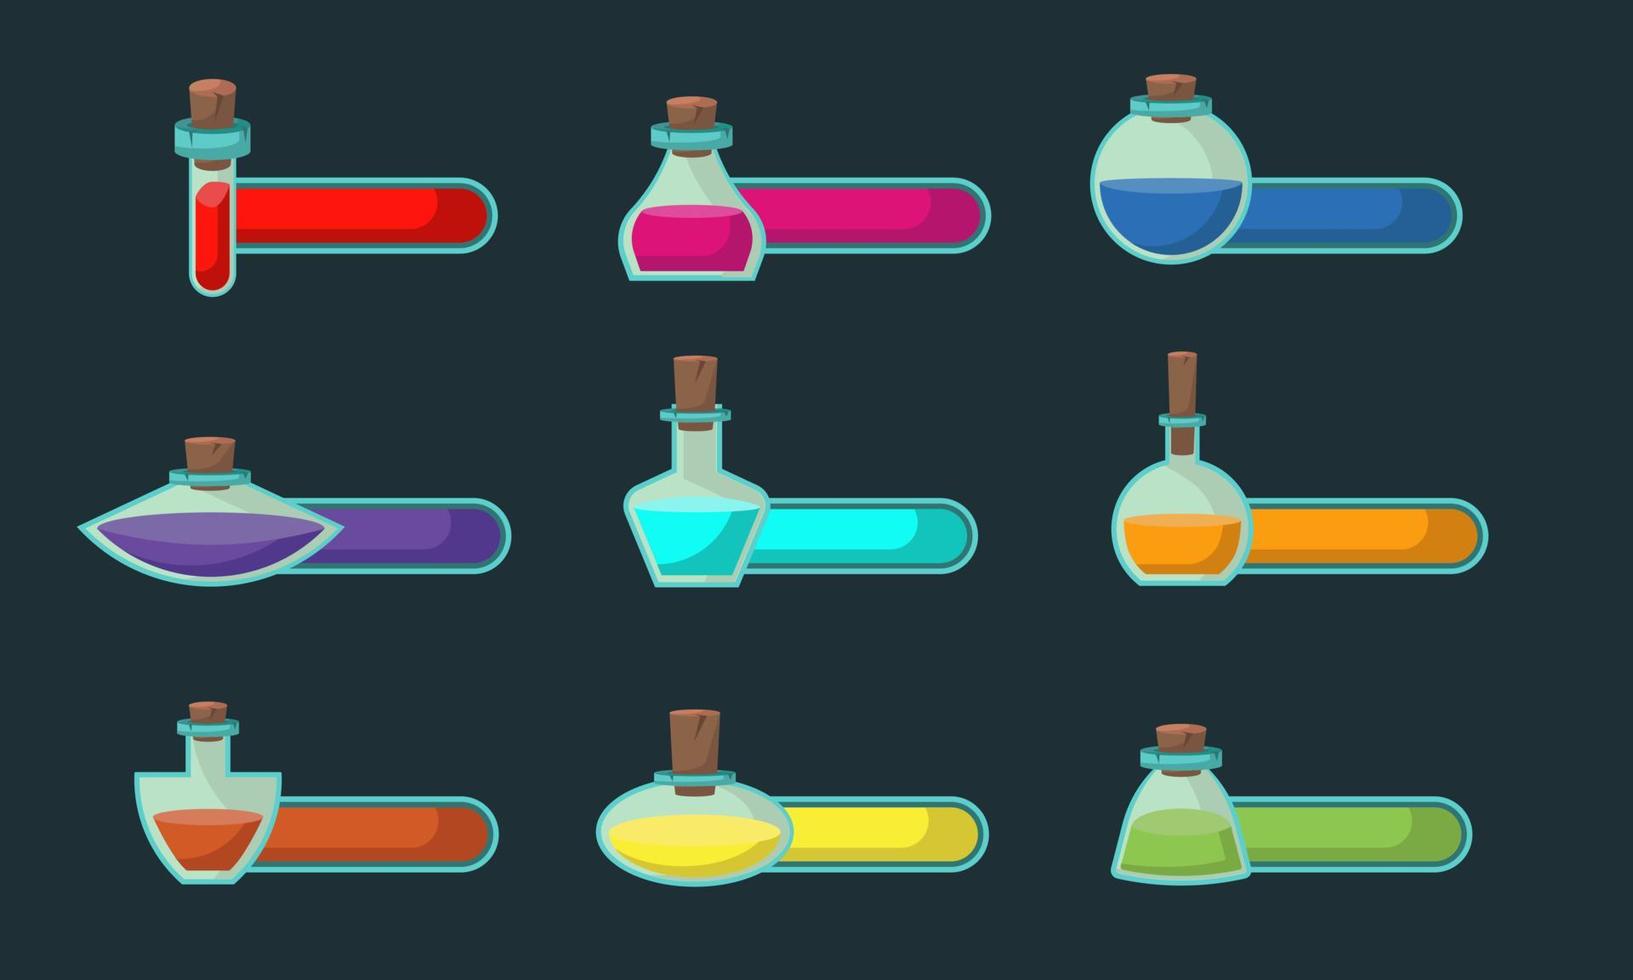 Set game icons of bottles with poison or elixir and status indicator. GUI bar element for game design and collection of magical liquids in glass bottles. Vector illustration for mobile video game